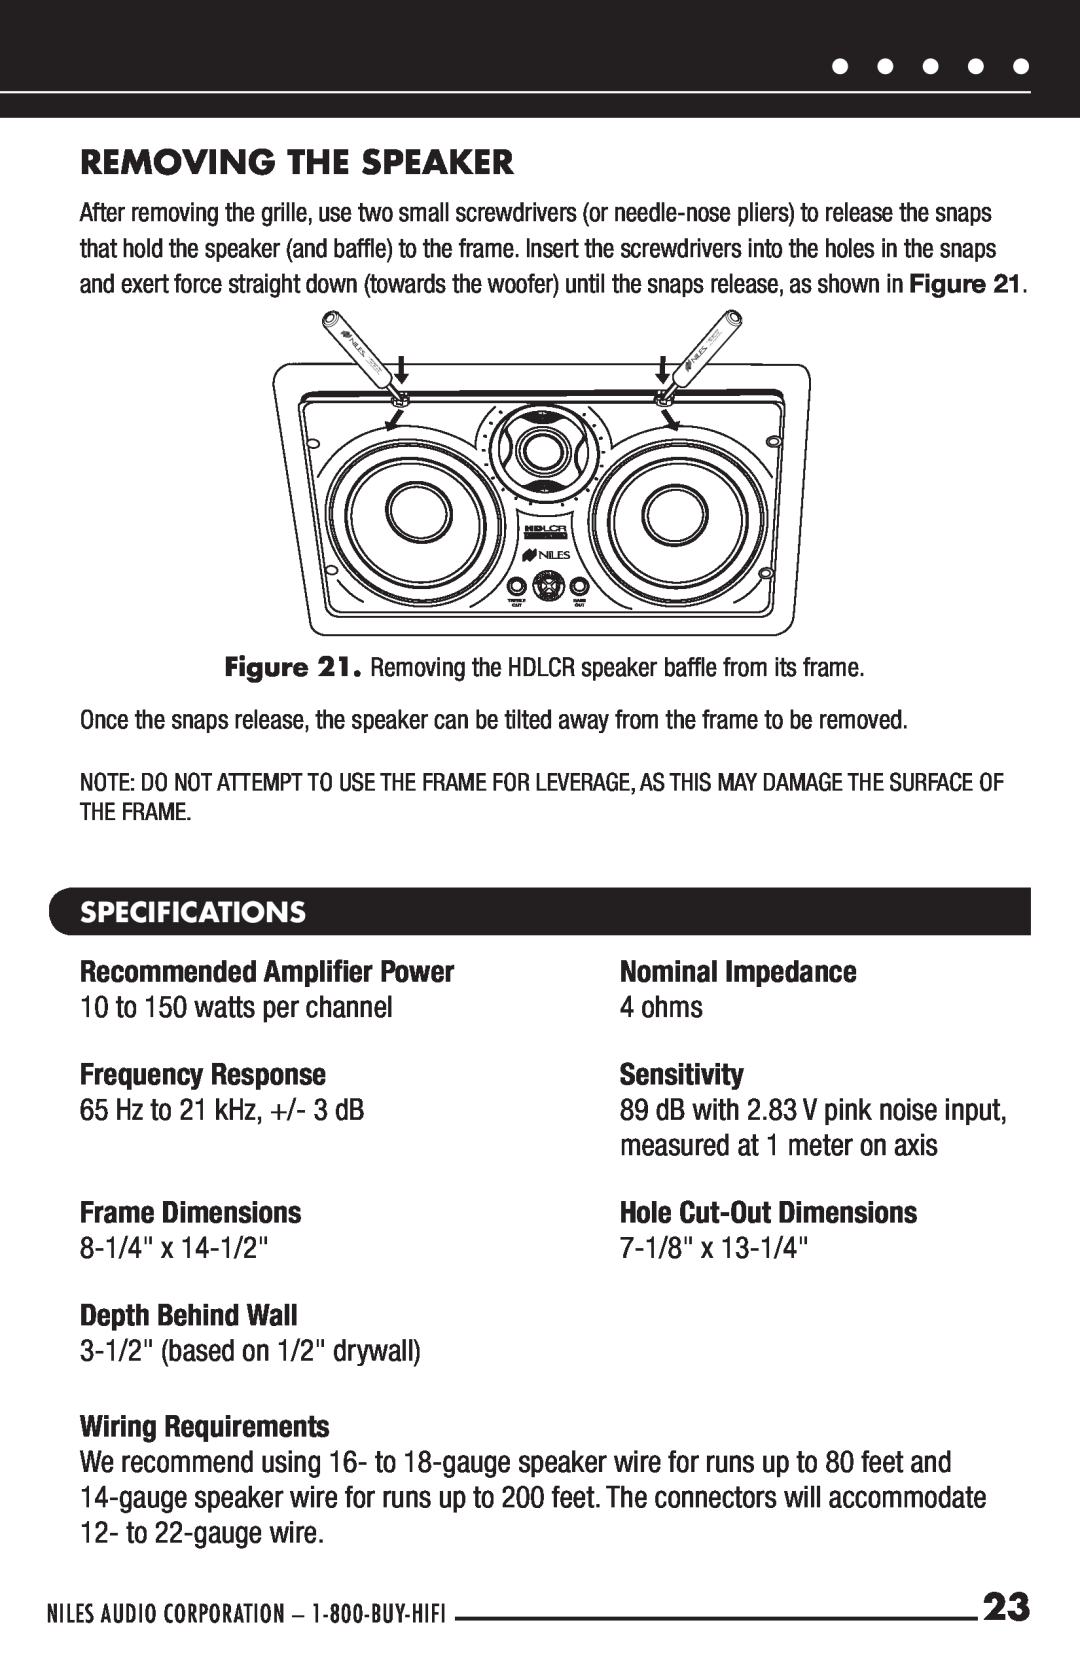 Niles Audio HDLCR manual Removing The Speaker 